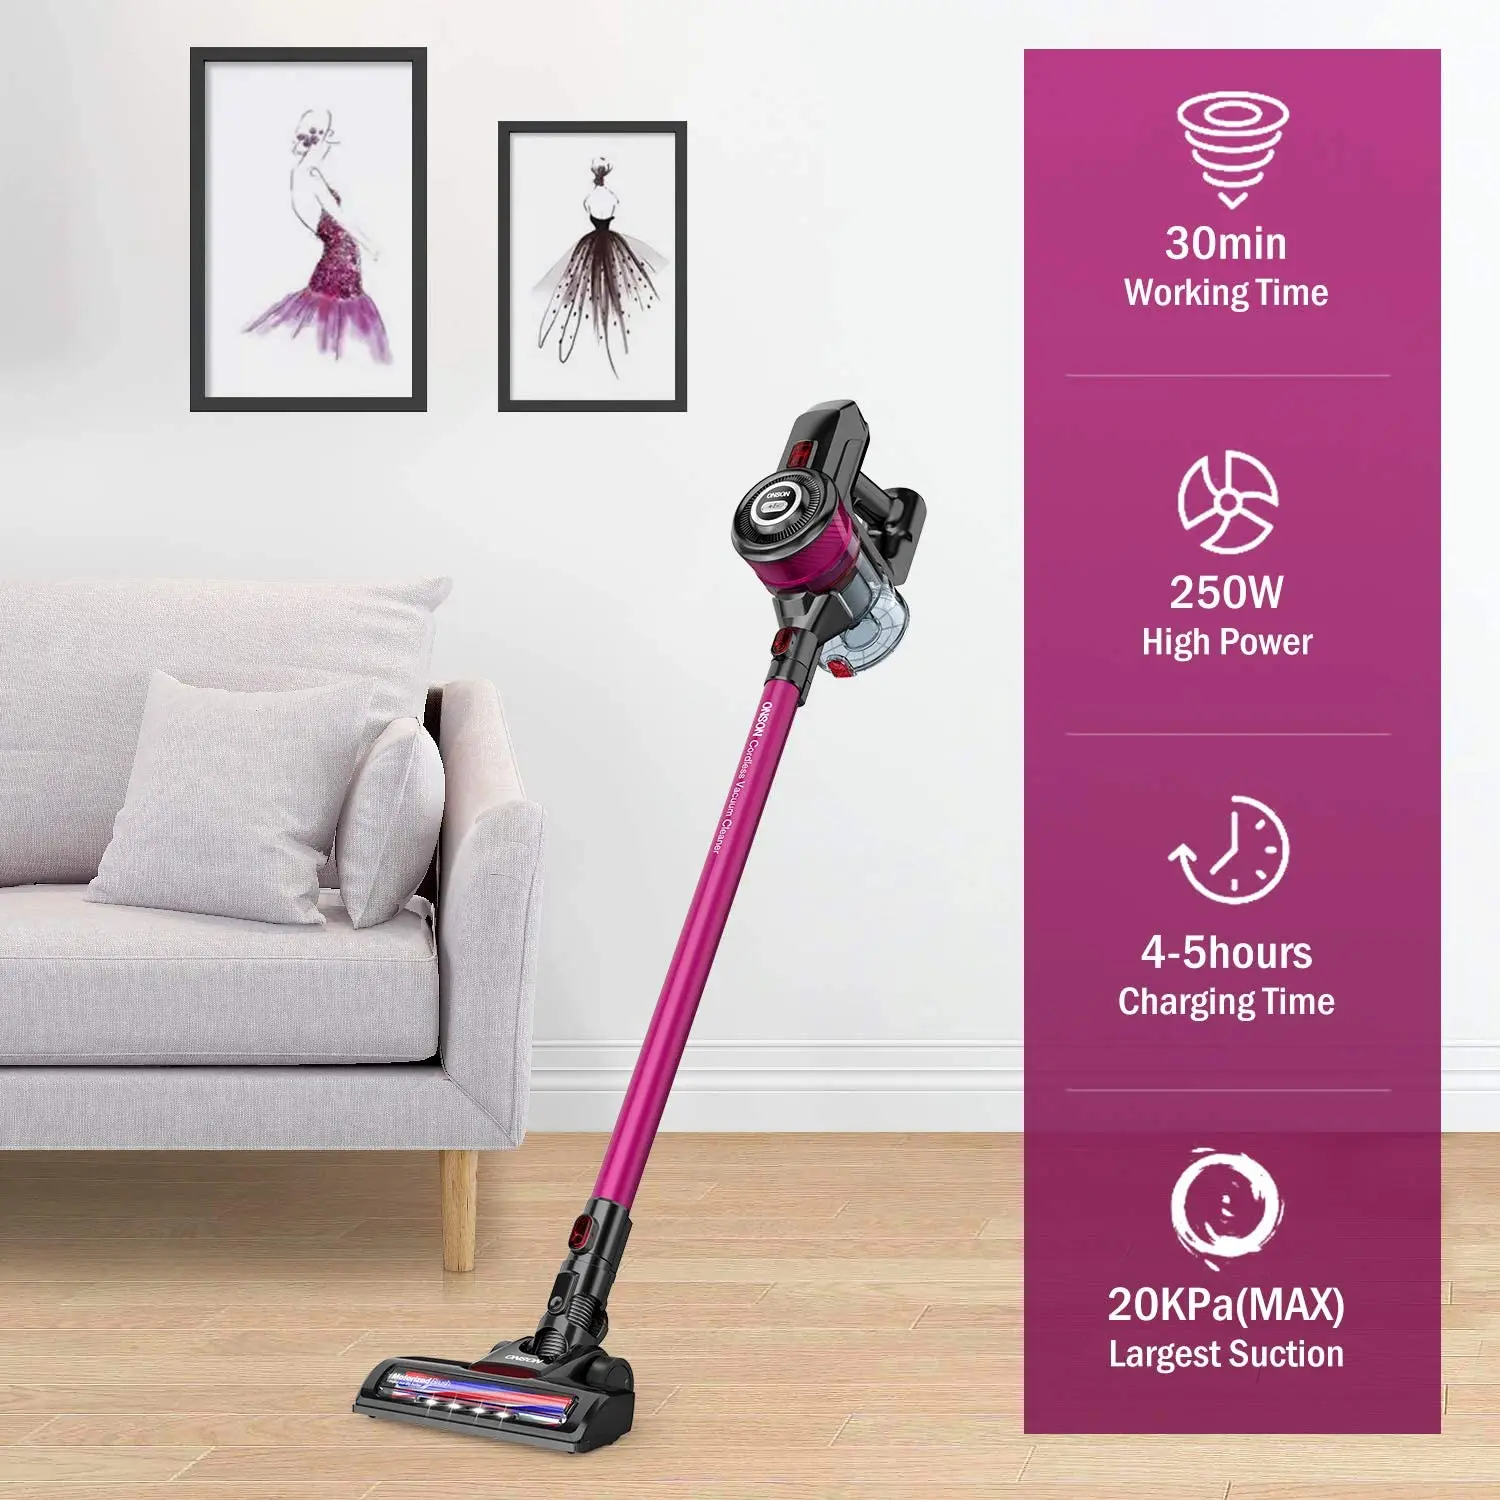 ONSON D18Epro Vacuum Cleaner Cordless Vacuum 20kPa Strong Suction 2-1 Stick 250W 